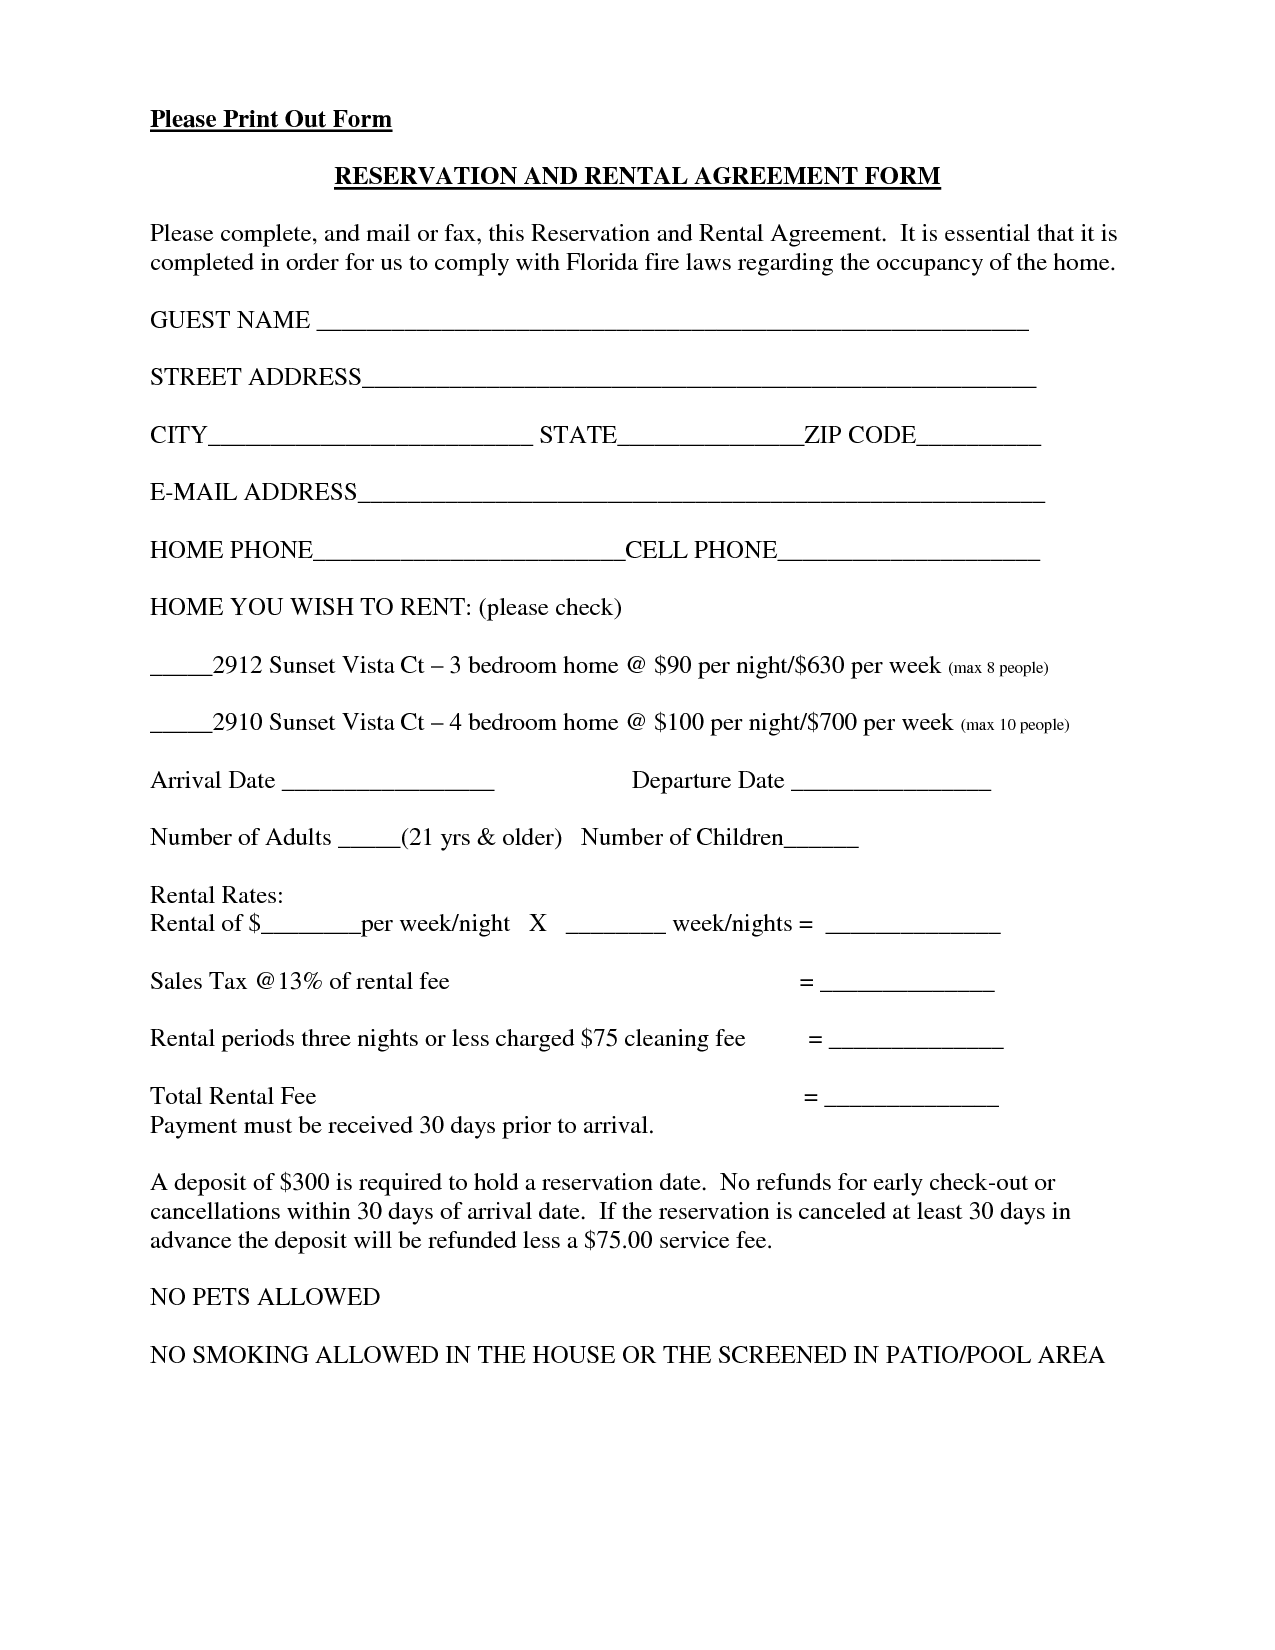 lease-agreement-form-free-printable-documents